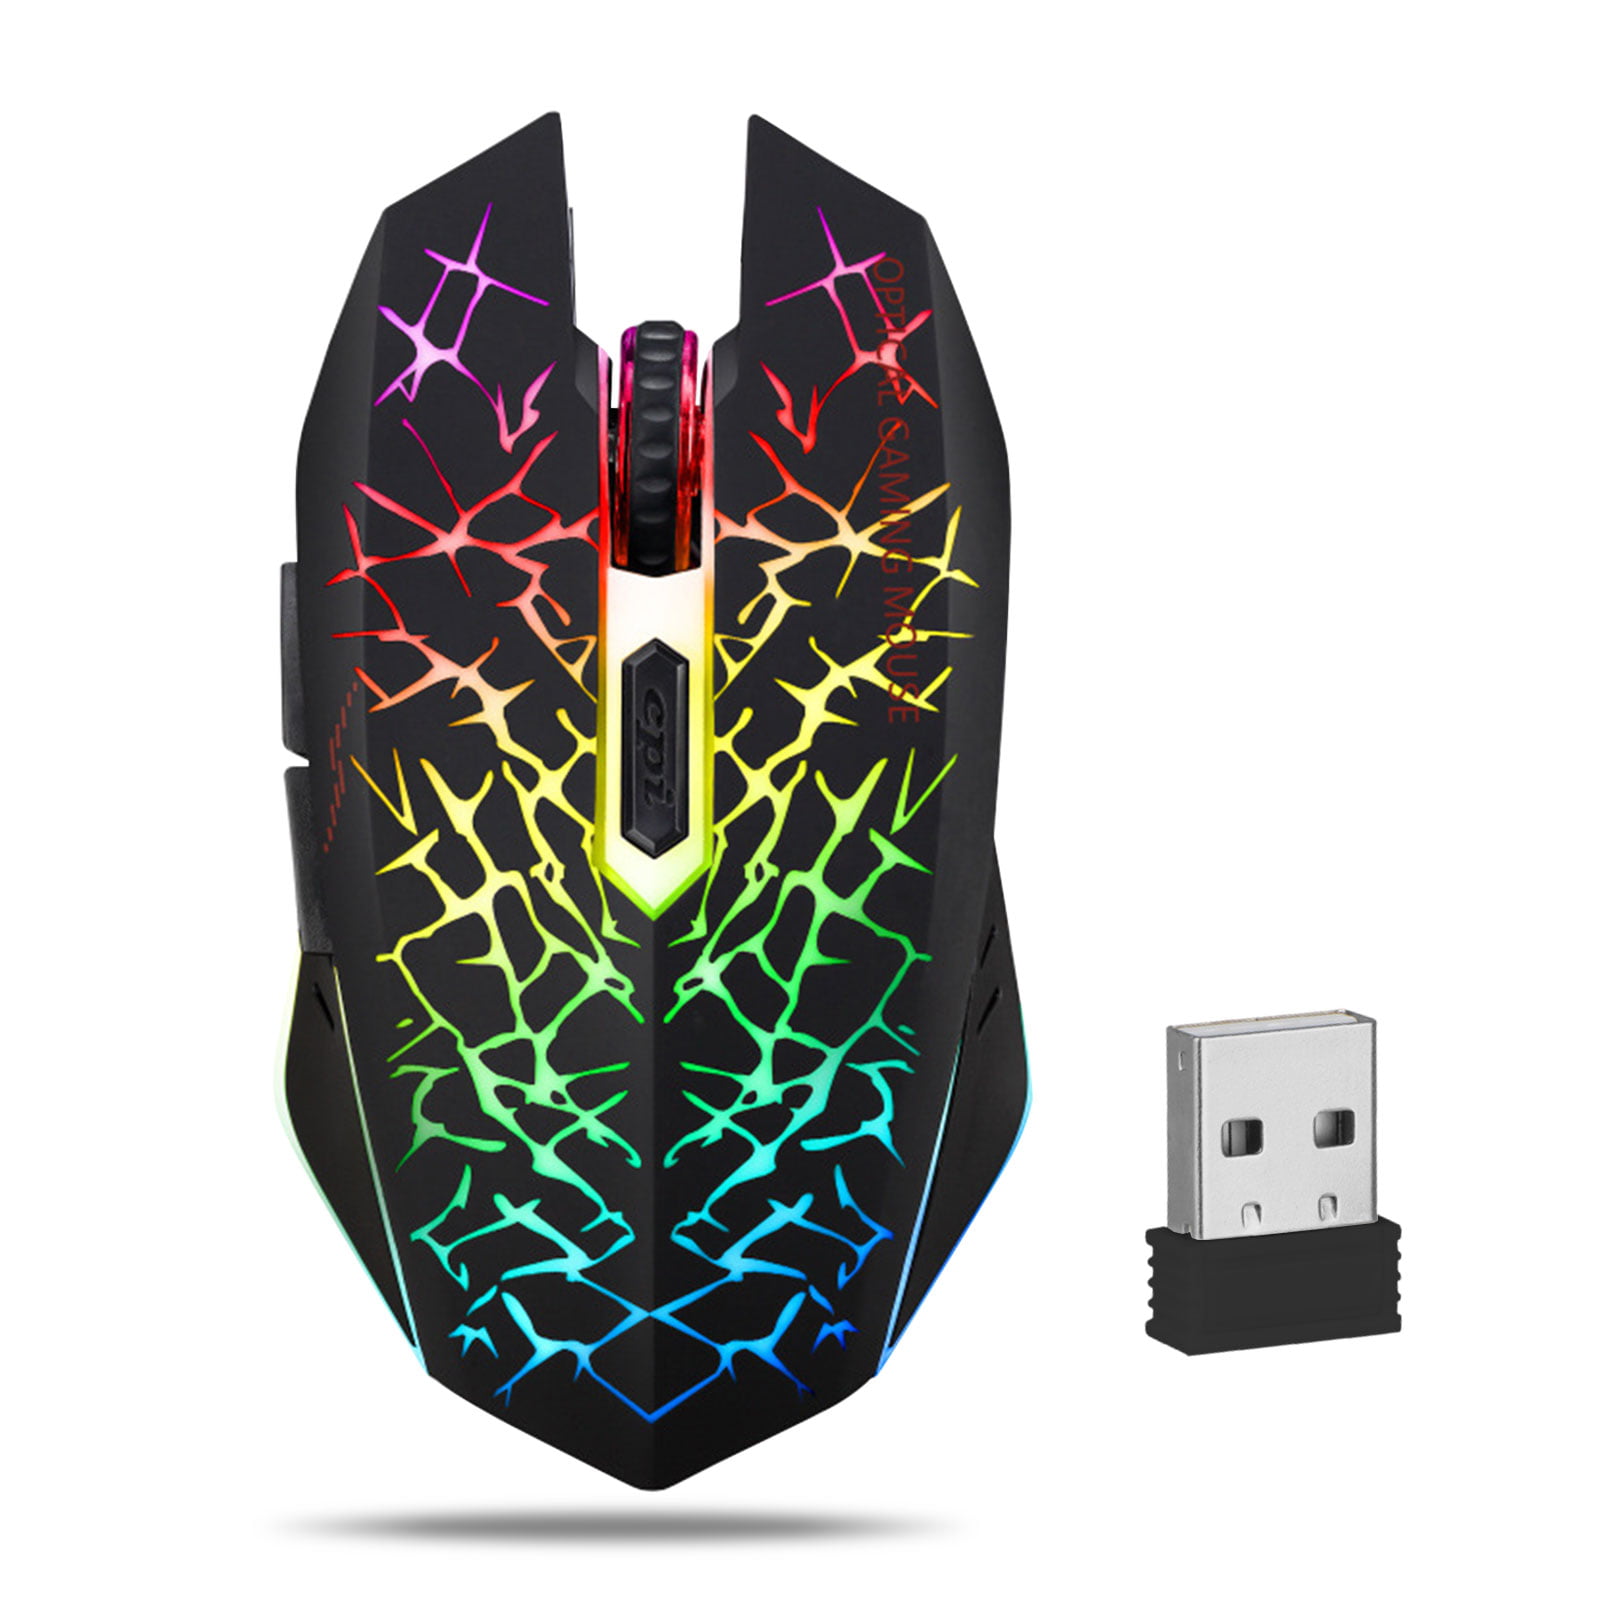 Wireless Gaming Mouse Tsv Silent Click Wireless Rechargeable Mouse With Colorful Led Lights And 2400 1600 10 Dpi For Laptop And Computer Walmart Com Walmart Com